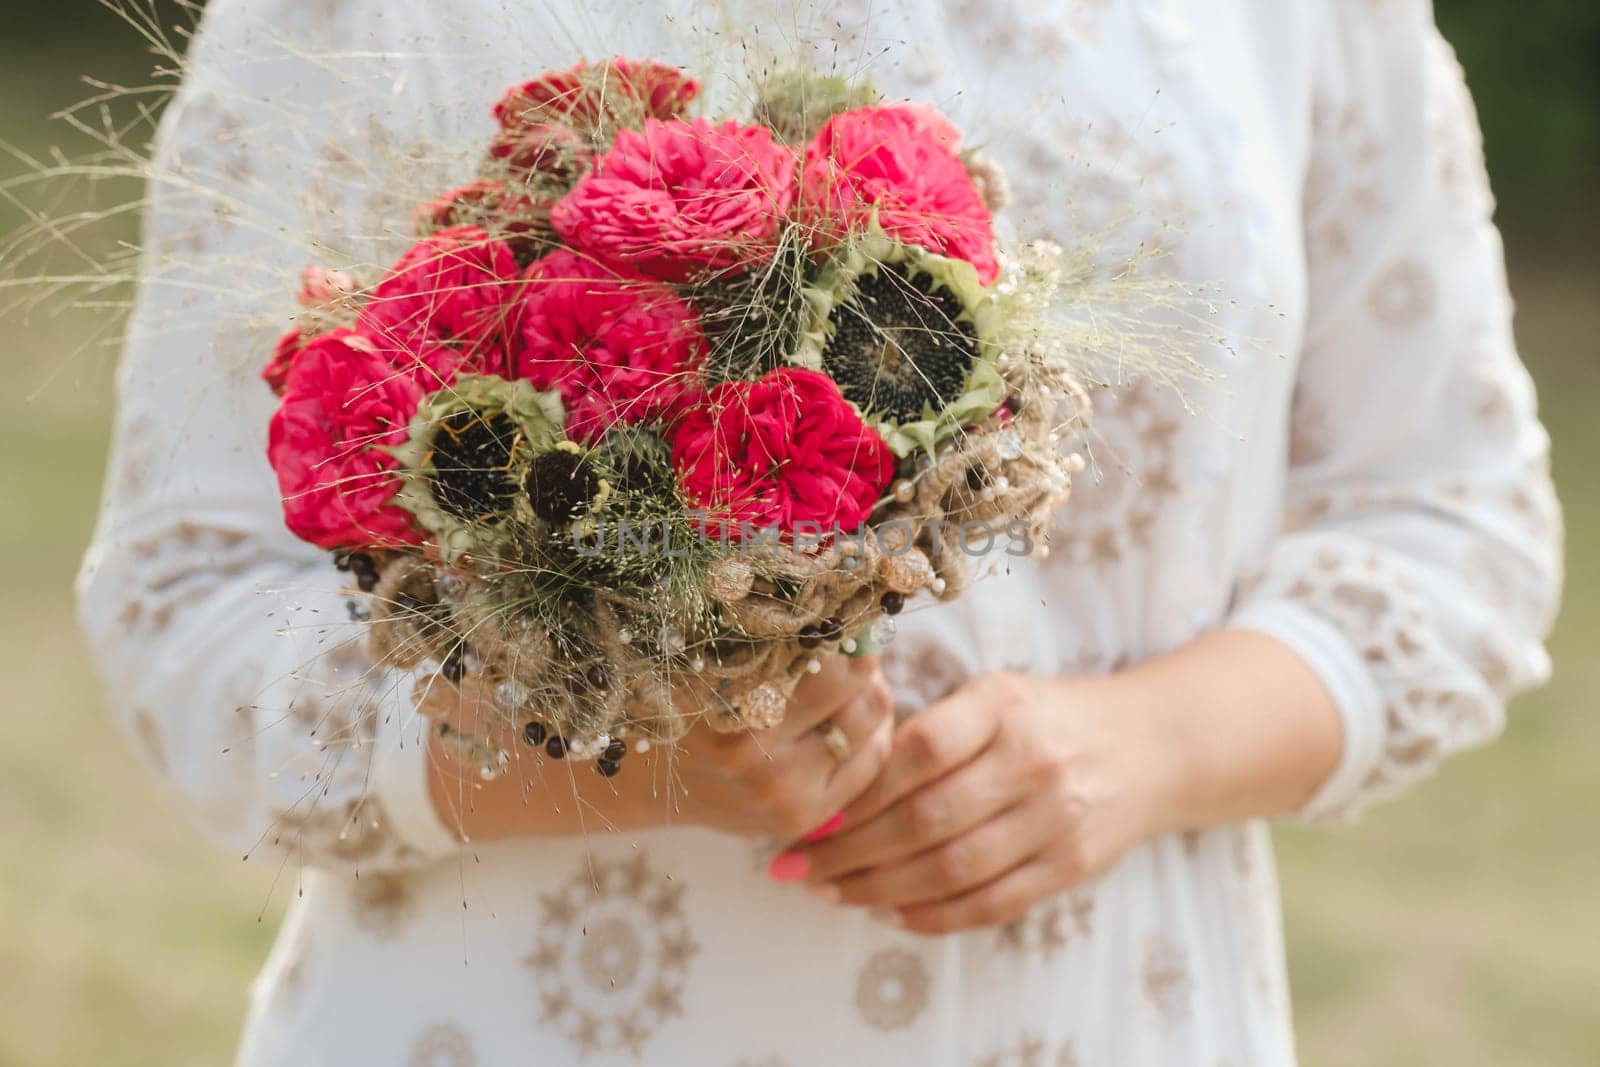 The bride holds her wedding bouquet with red peonies and sunflowers in her hands.